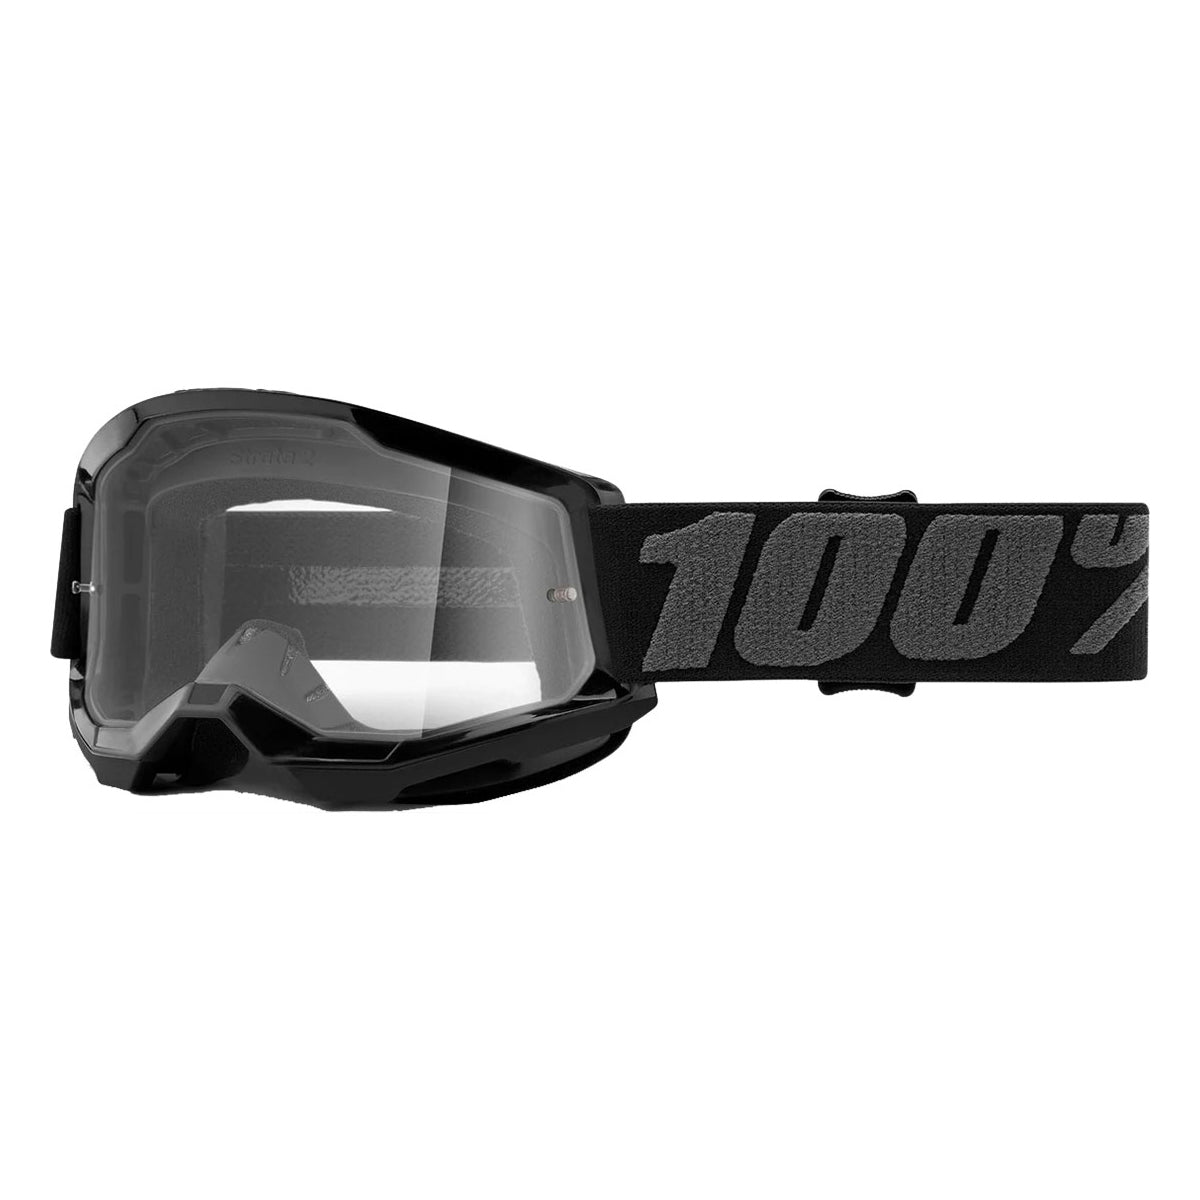 100 Percent Strata 2 Youth Goggles - Black - Clear Lens